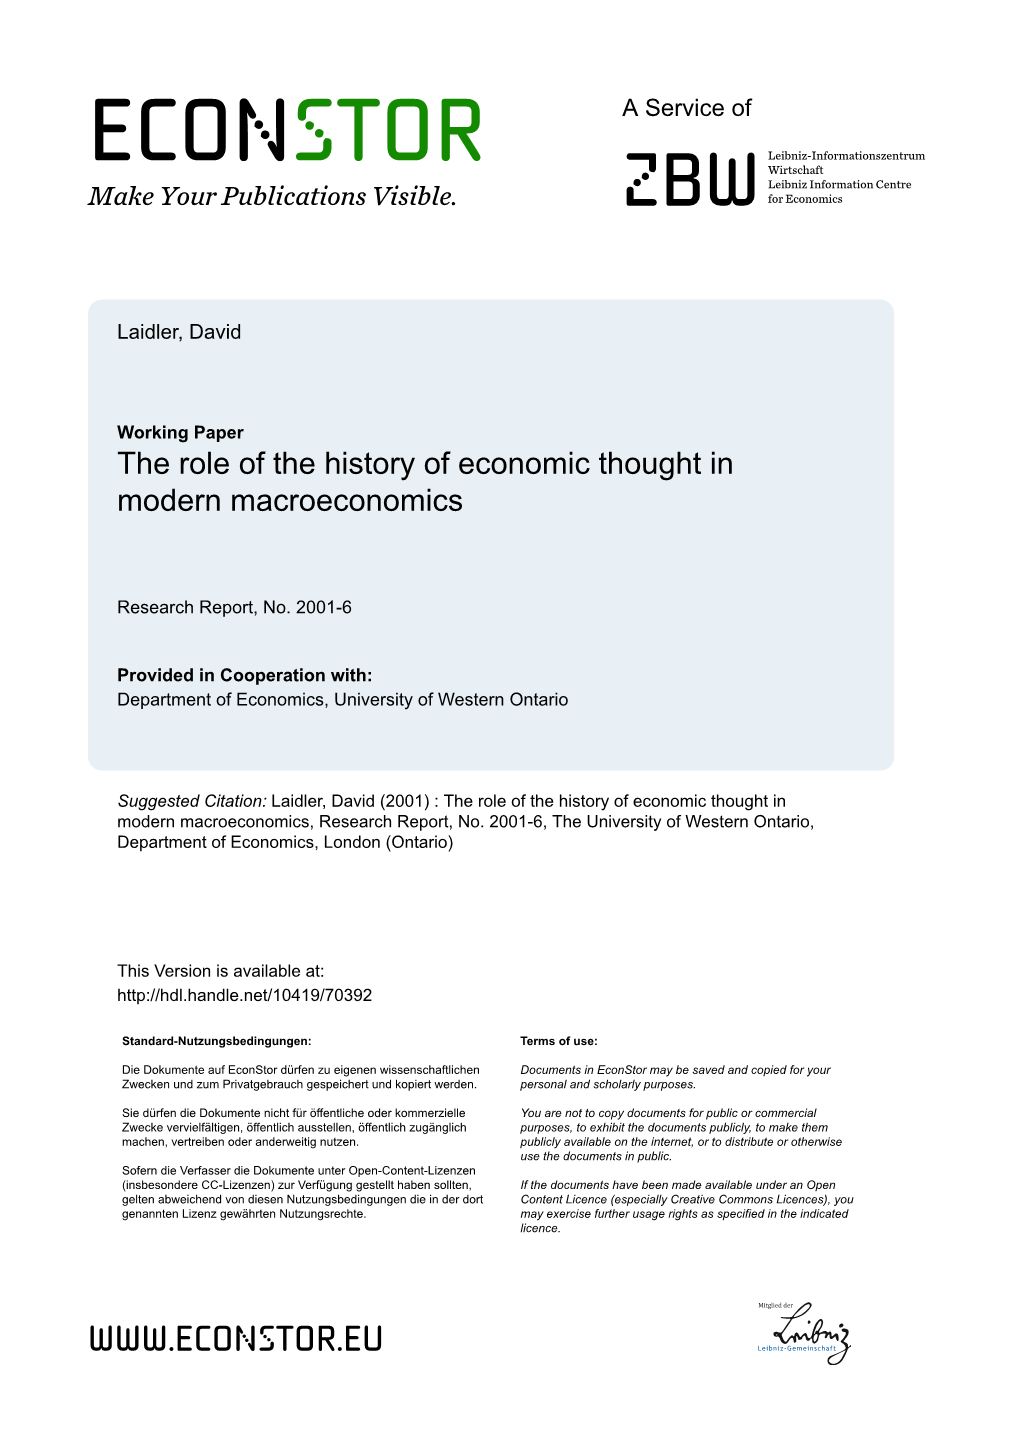 The Role of the History of Economic Thought in Modern Macroeconomics